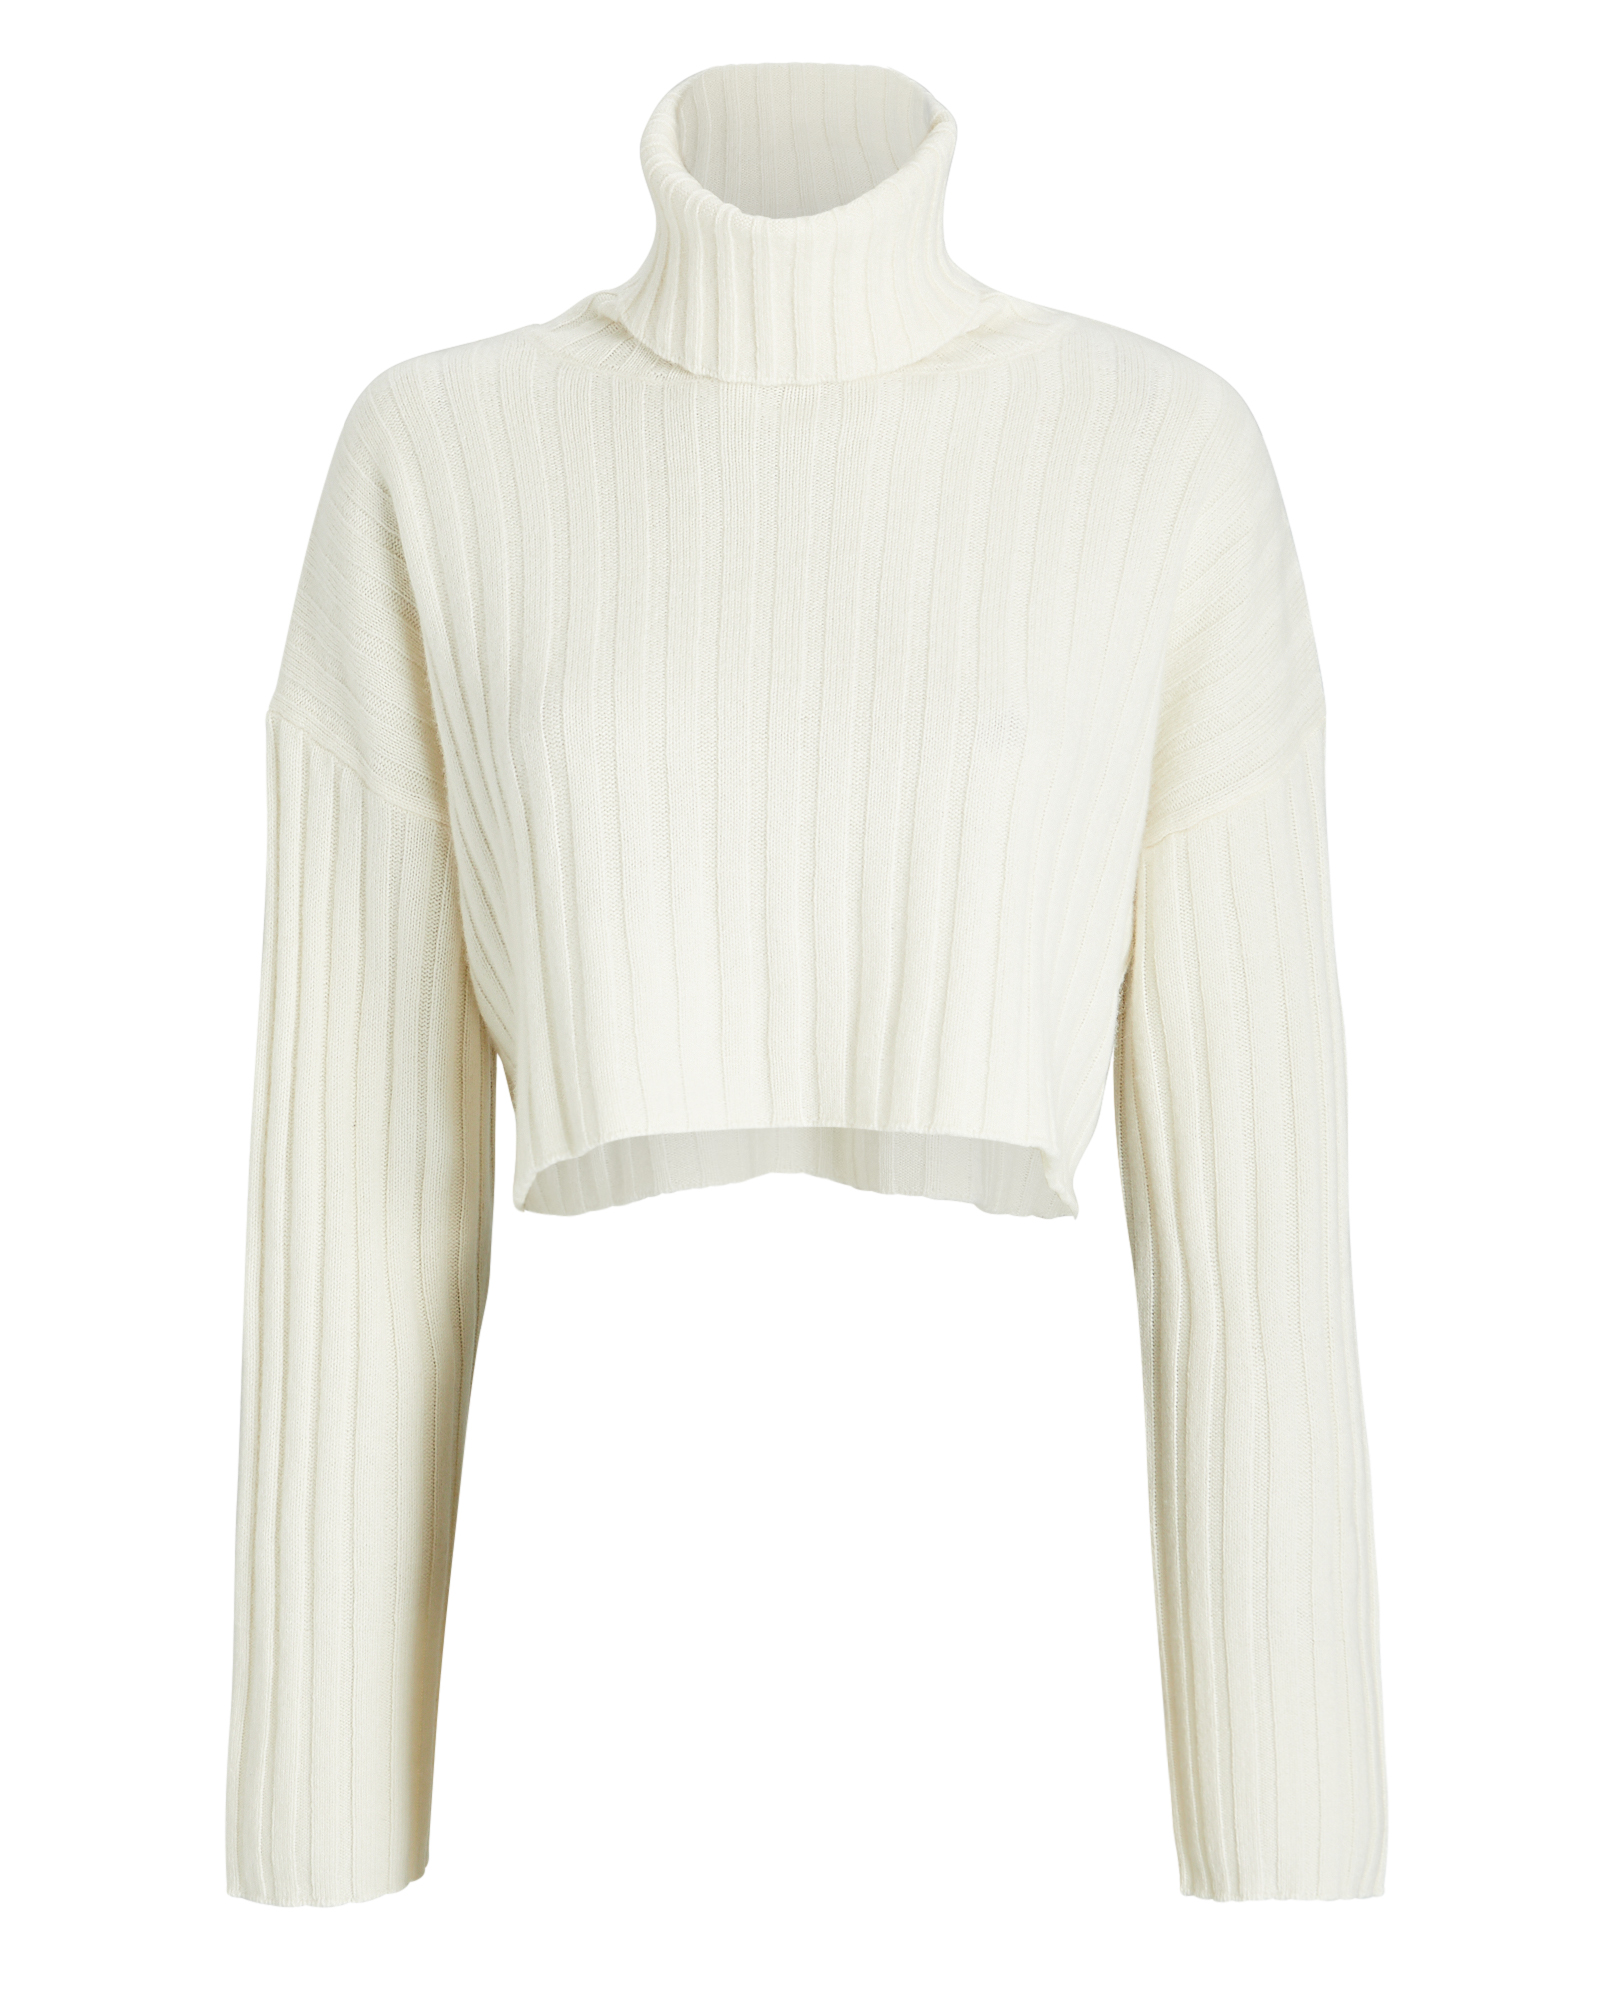 SABLYN Uma Cropped Sweater In White | INTERMIX®